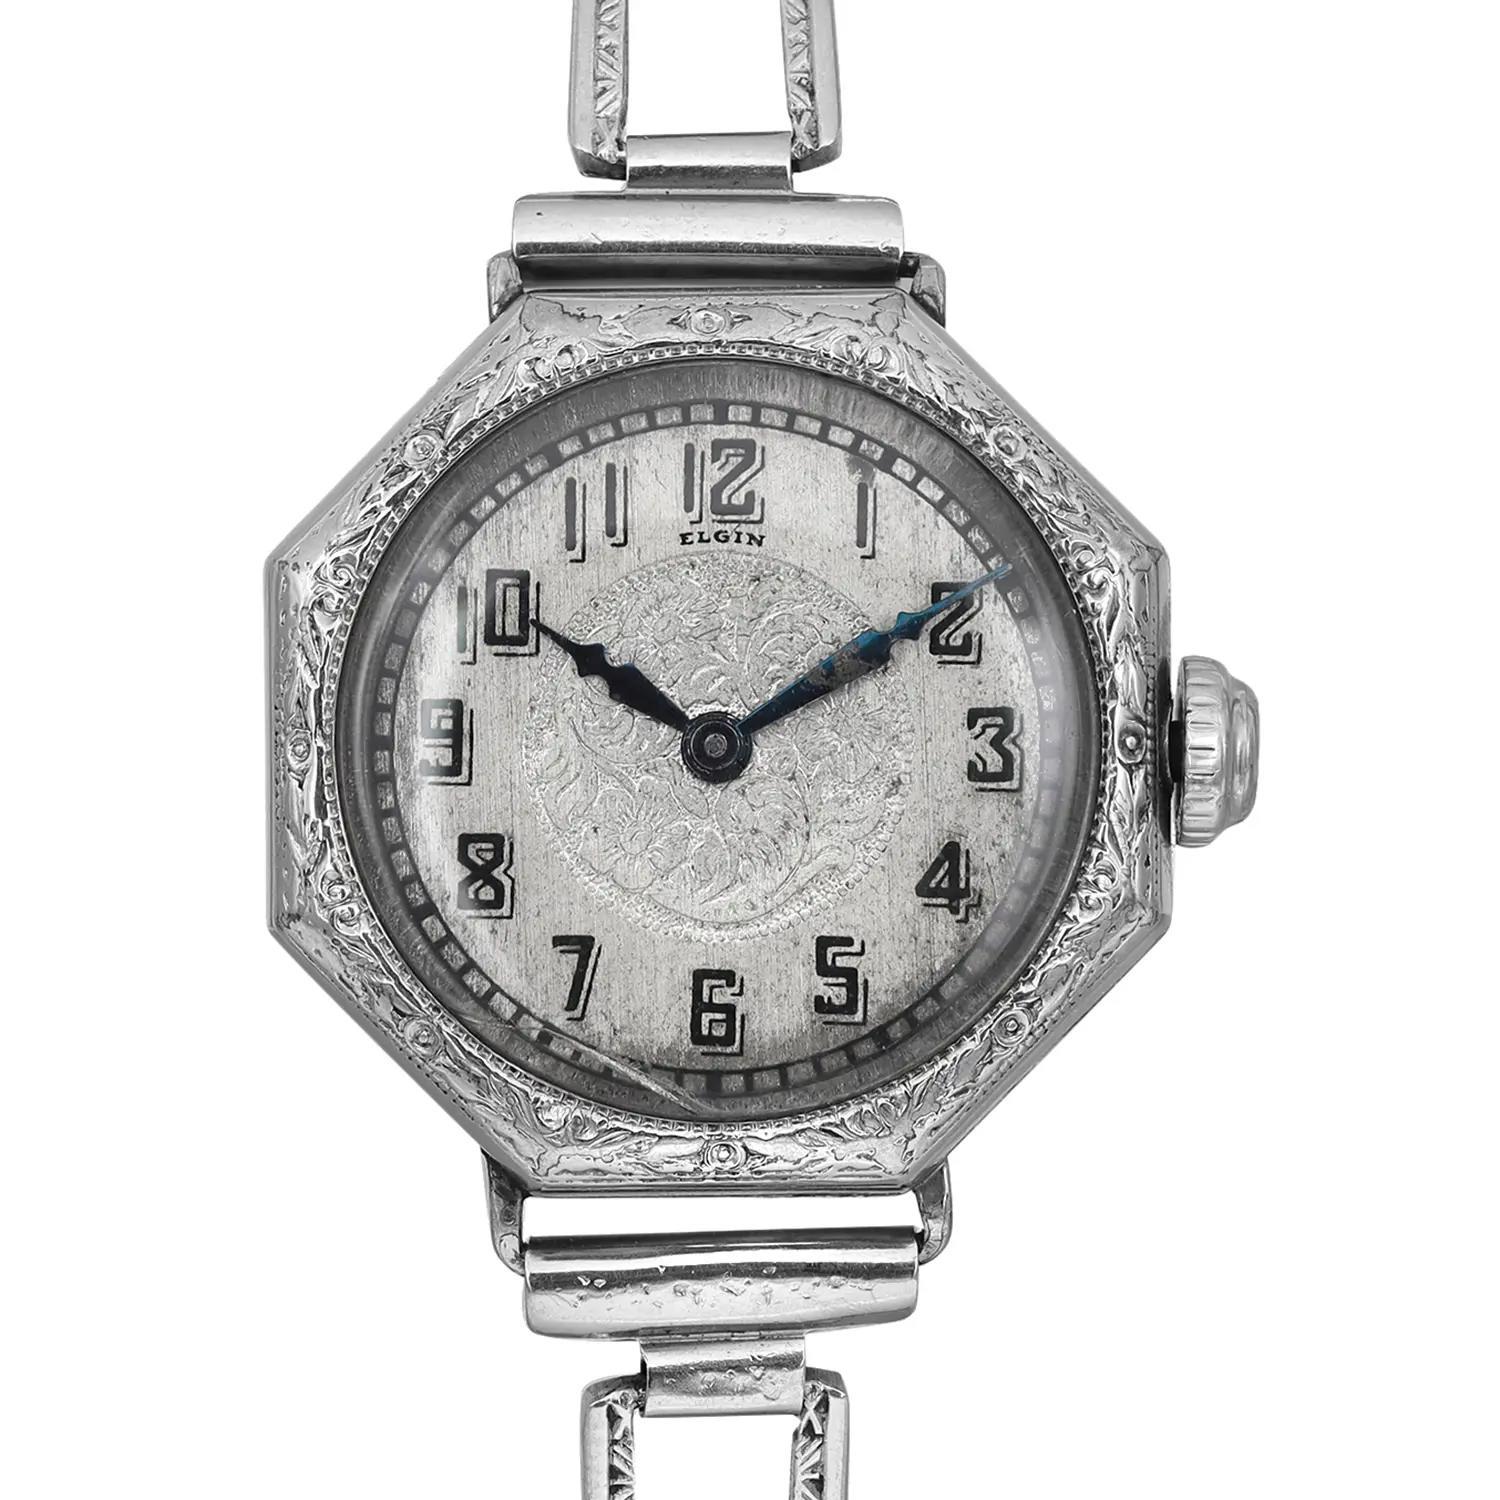 Pre-owned Elgin Vintage Octagonal Shaped 14k White Gold Filled Silver Floral Dial Wristwatch. Patina on the Dial, Blue Hands Showing Rust. No Original Box and Papers are Included. 

Brand: Elgin  Type: Wristwatch  Department: Women  Style: Classic 